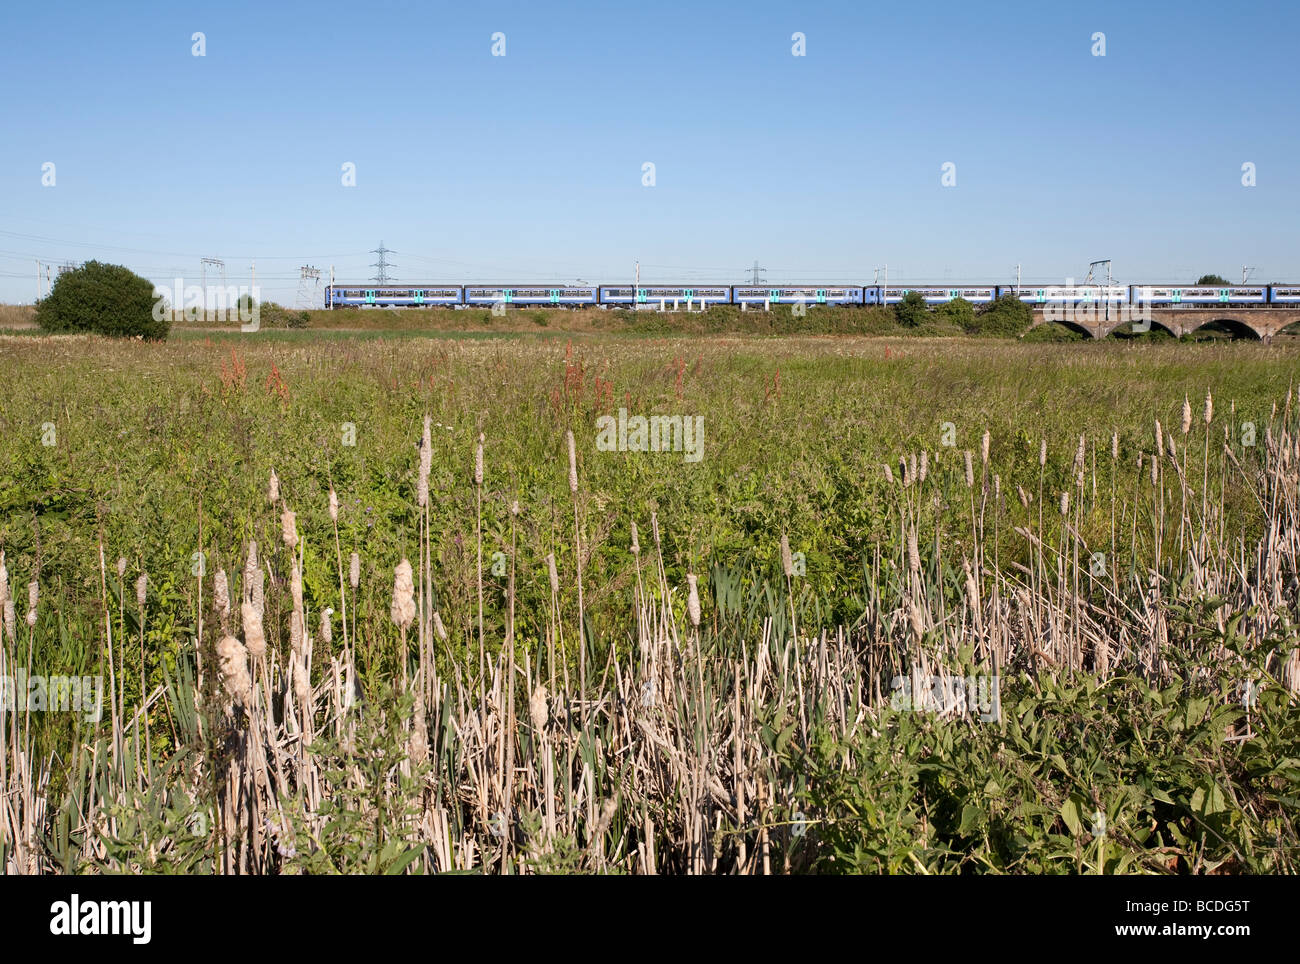 Train seen from Walthamstow Marshes. Lee Valley Regional Park, London, England, UK Stock Photo